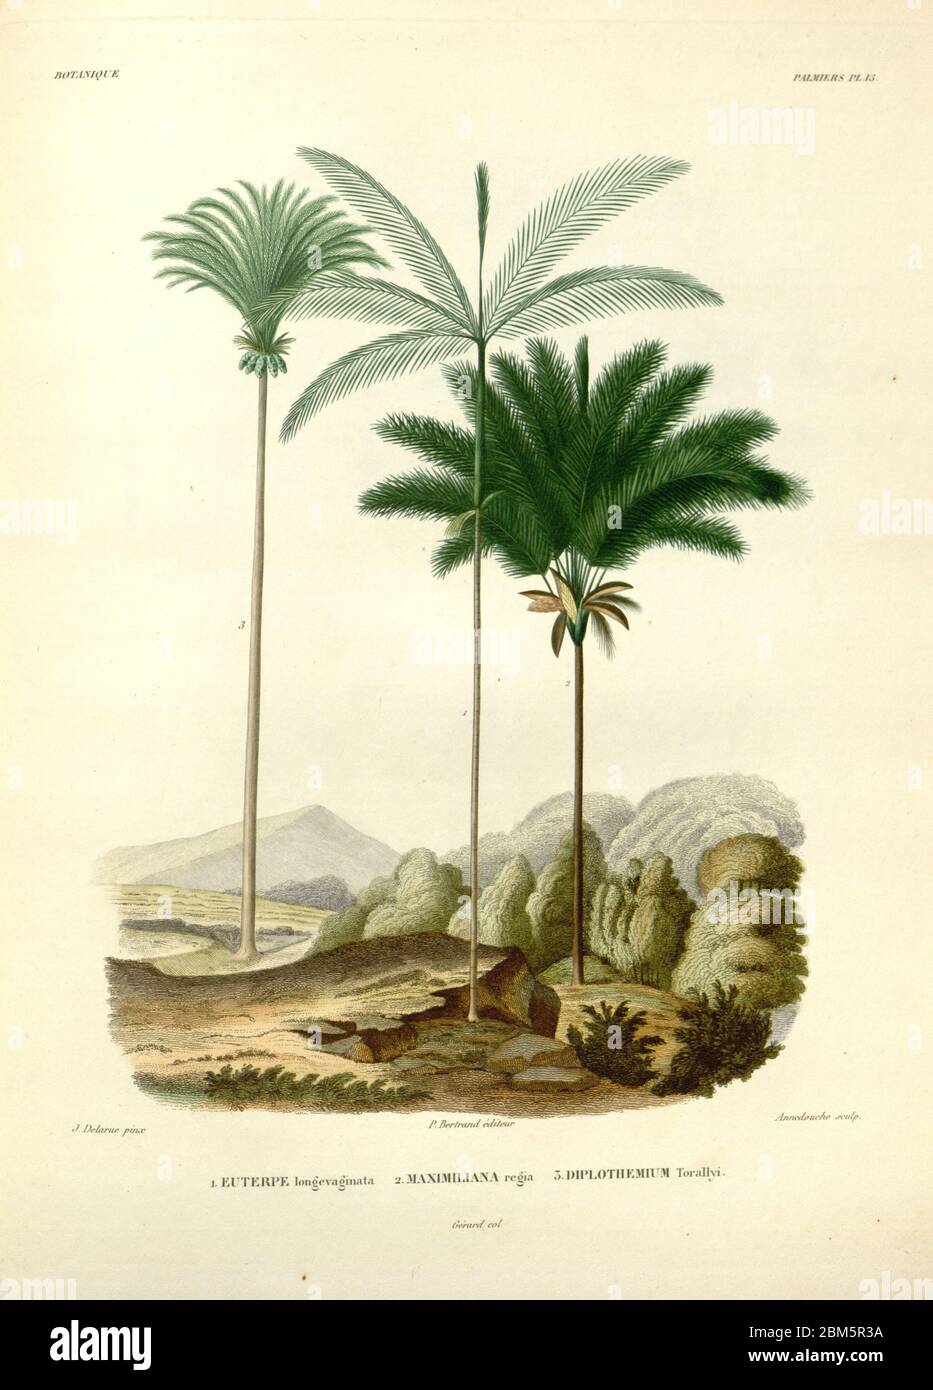 Palm trees of South America From the book 'Voyage dans l'Amérique Méridionale' [Journey to South America: (Brazil, the eastern republic of Uruguay, the Argentine Republic, Patagonia, the republic of Chile, the republic of Bolivia, the republic of Peru), executed during the years 1826 - 1833] By: Orbigny, Alcide Dessalines d', 1802-1857; Montagne, Jean François Camille, 1784-1866; Martius, Karl Friedrich Philipp von, 1794-1868 Published Paris :Chez Pitois-Levrault et c.e ... ;1835-1847 Stock Photo